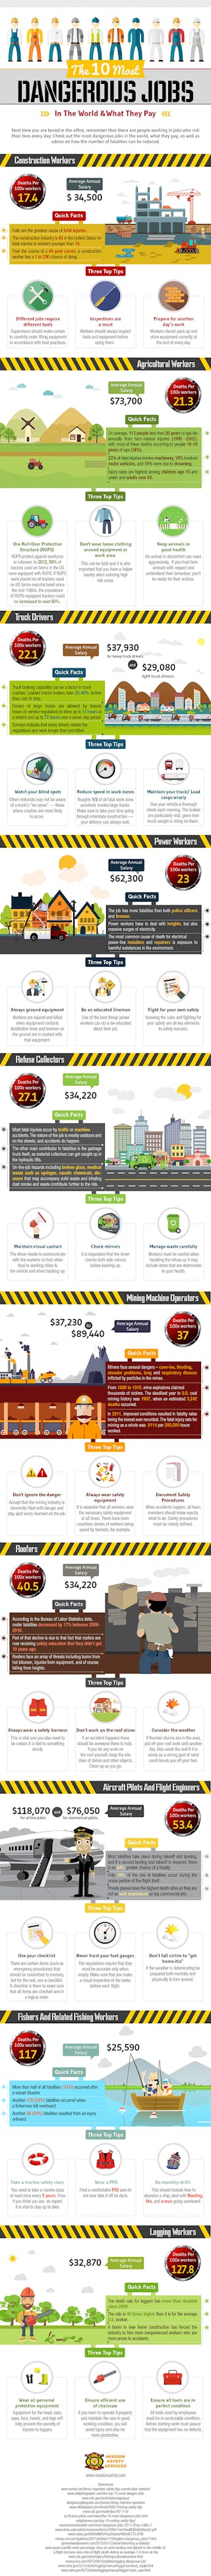 Ehstoday Com Sites Ehstoday com Files Uploads The 10 Most Dangerous Jobs In The World What They Pay An Infographic 1